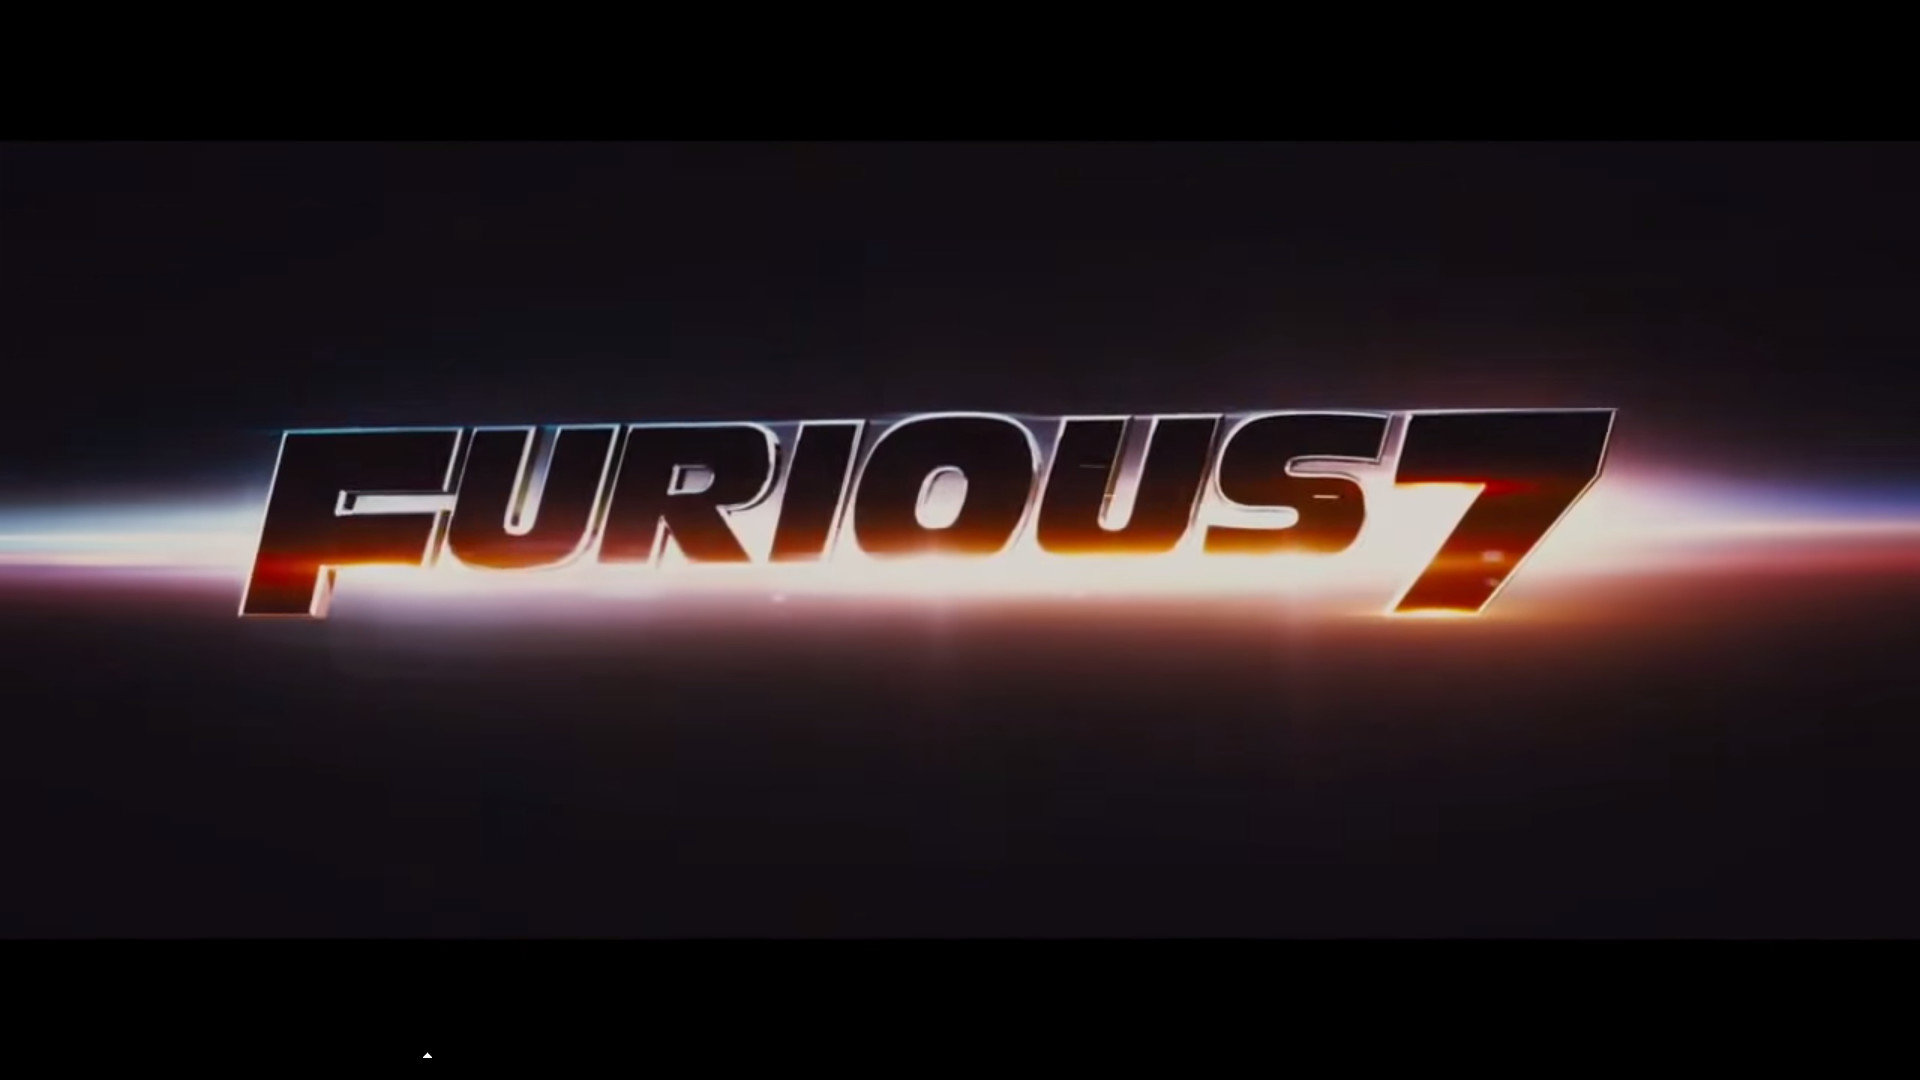 Fast And Furious 7 Wallpapers 1920x1080 Full Hd 1080p Desktop